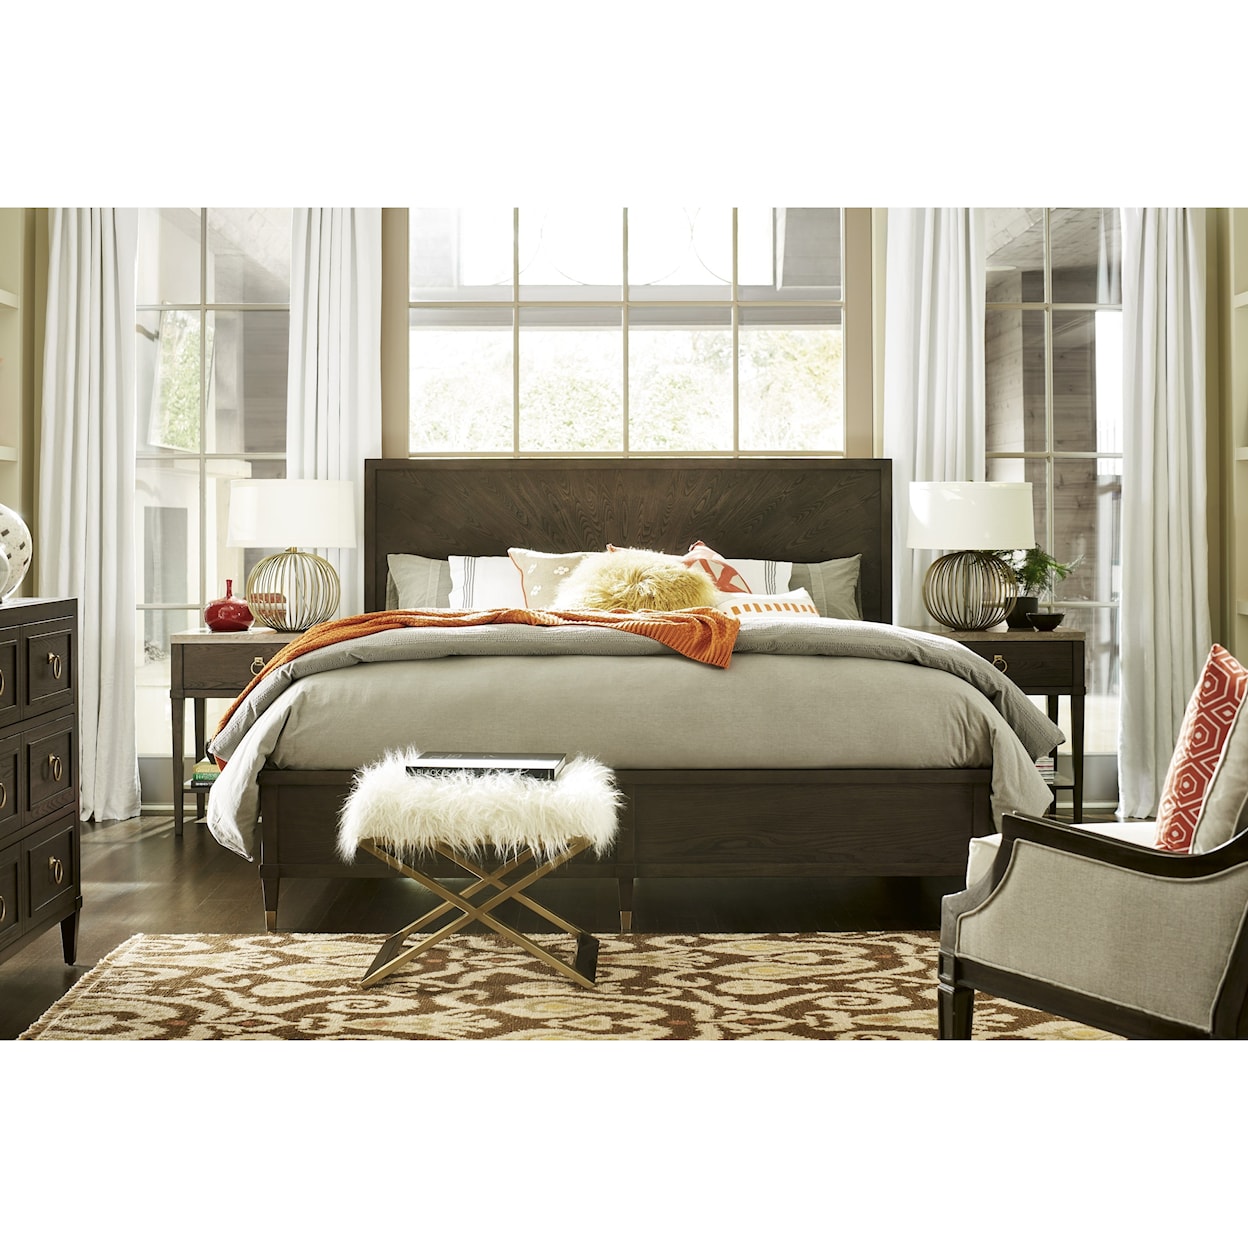 Universal Soliloquy King Bedroom Group